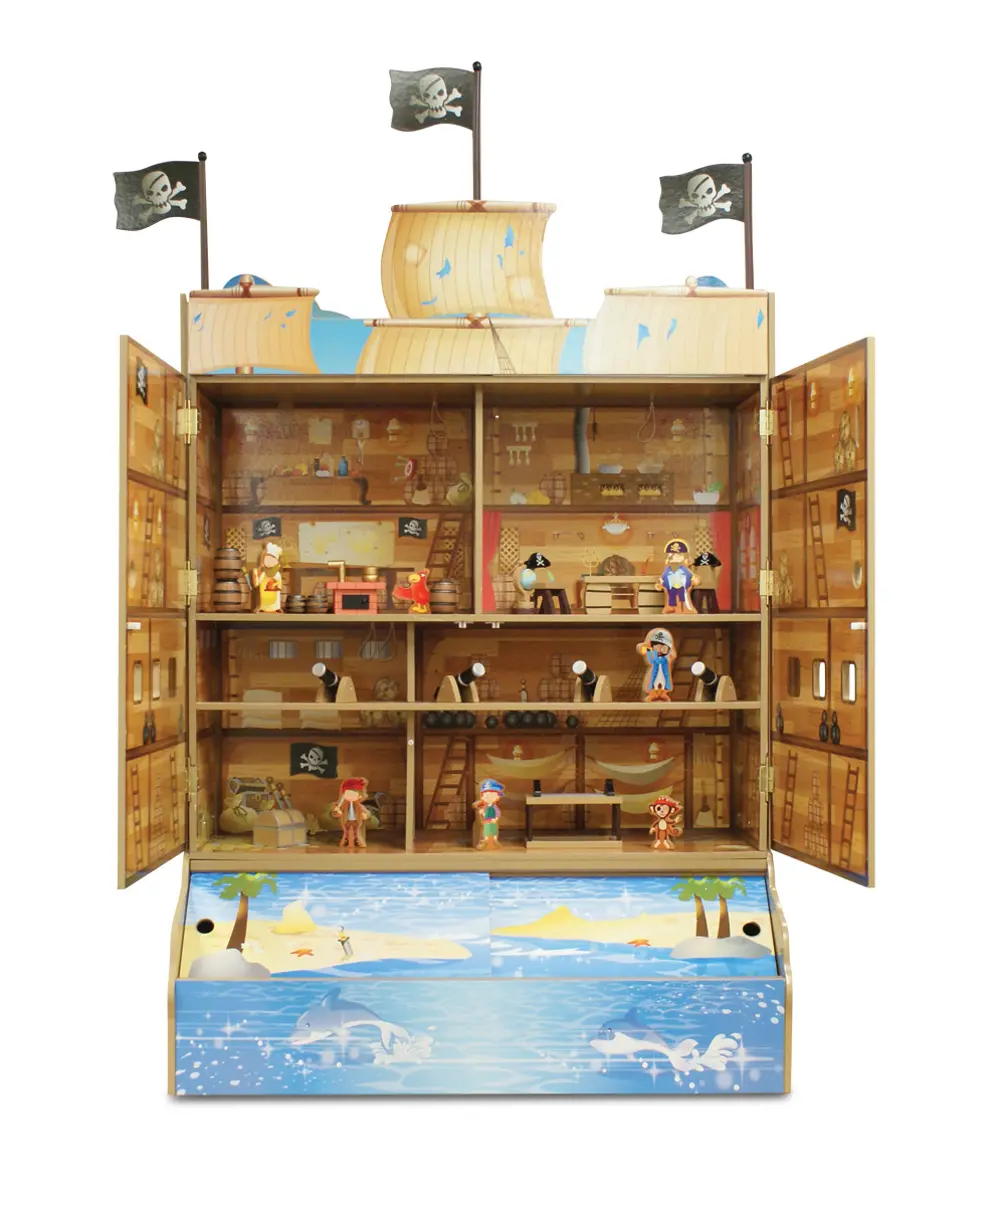 KYD-10856A-PIRATE 48 Inch Pirate Ship Playset-1